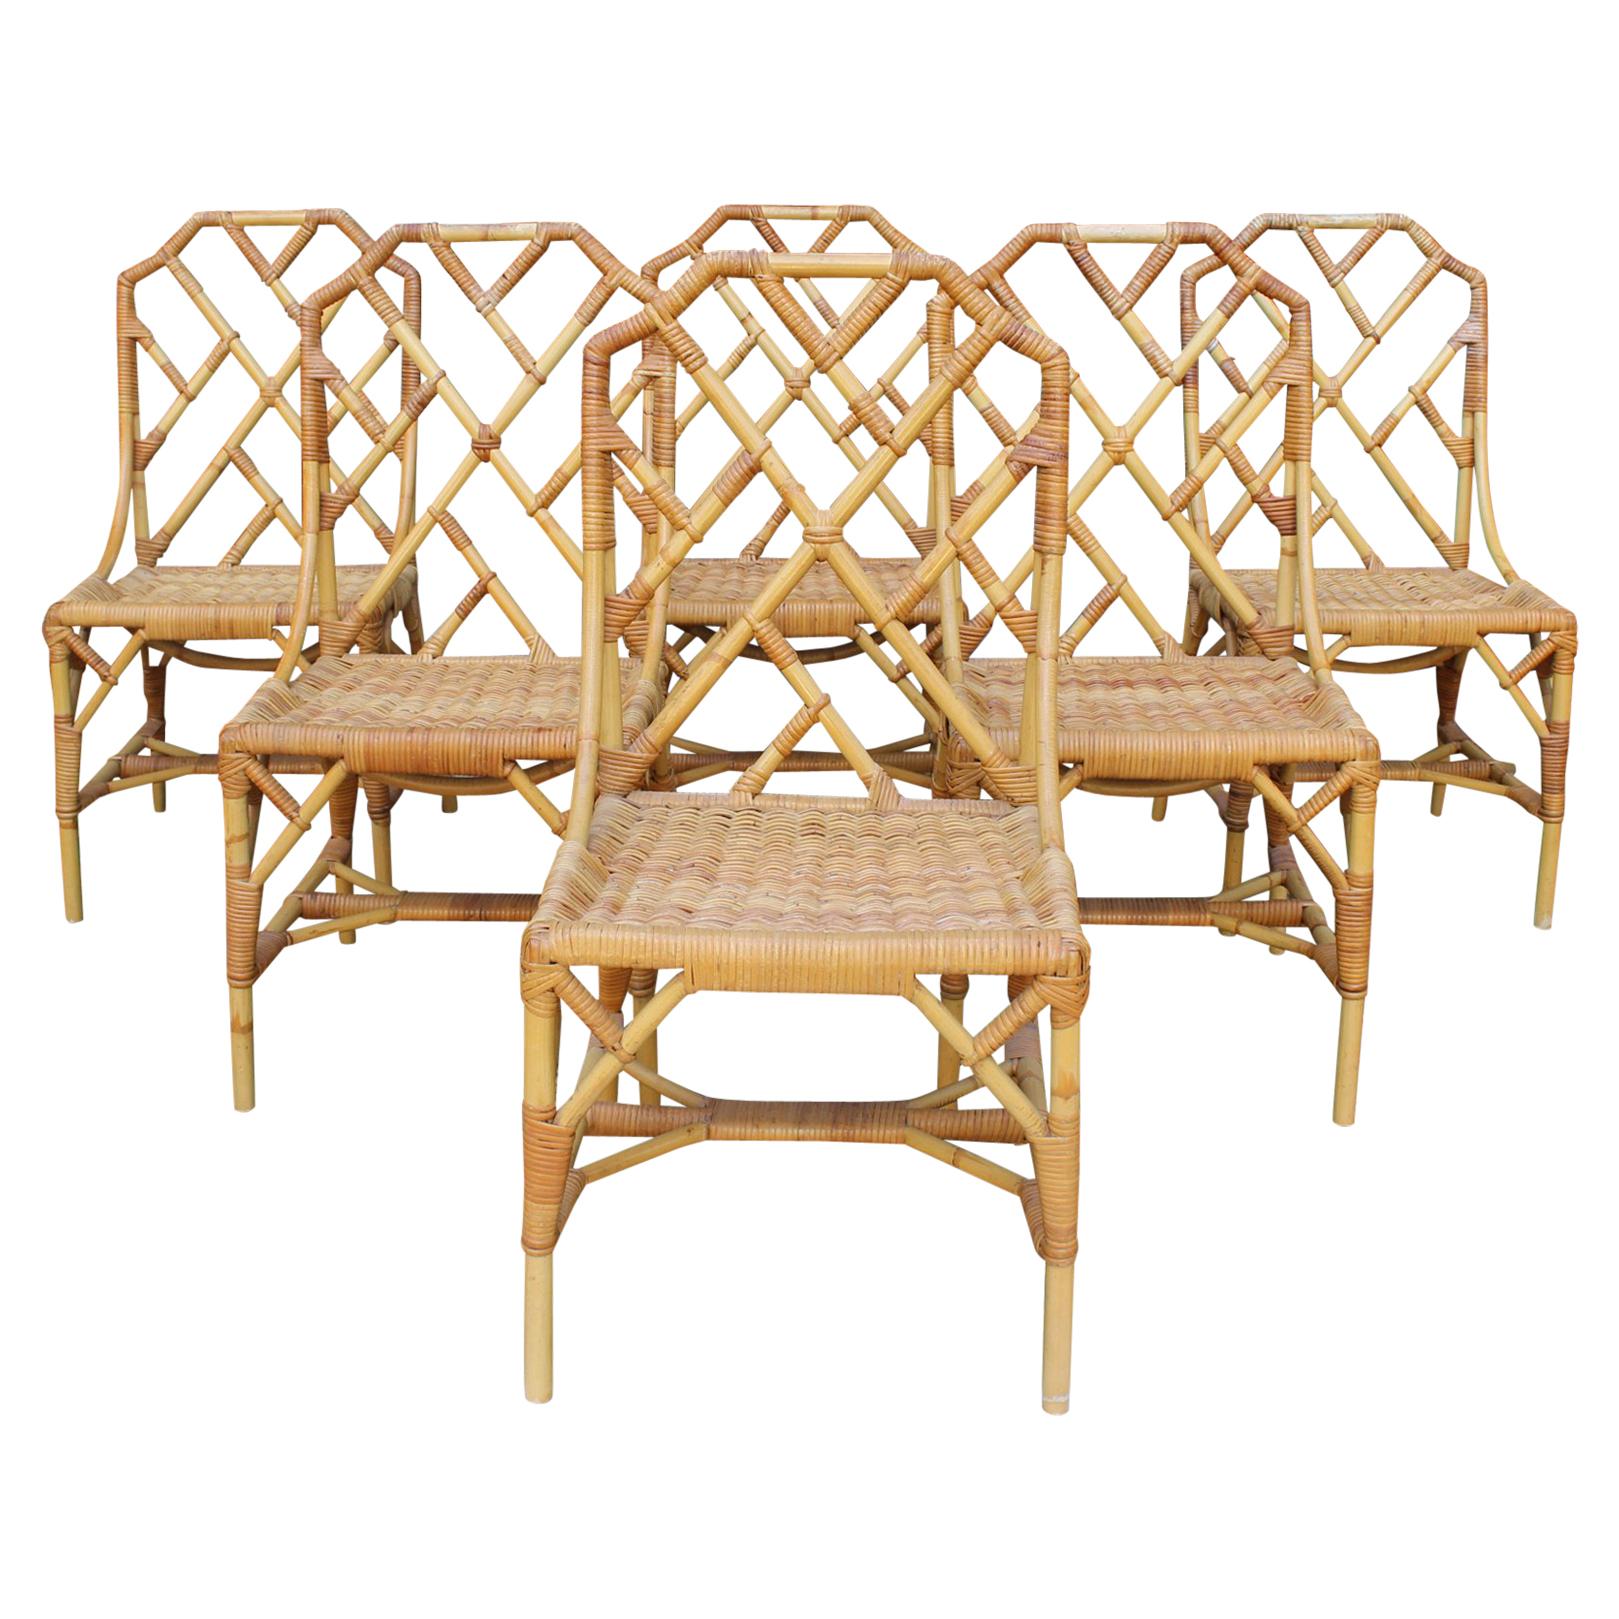 1970s Set of Six English "Invincible" Cane and Lazed Wicker Chairs by Angraves